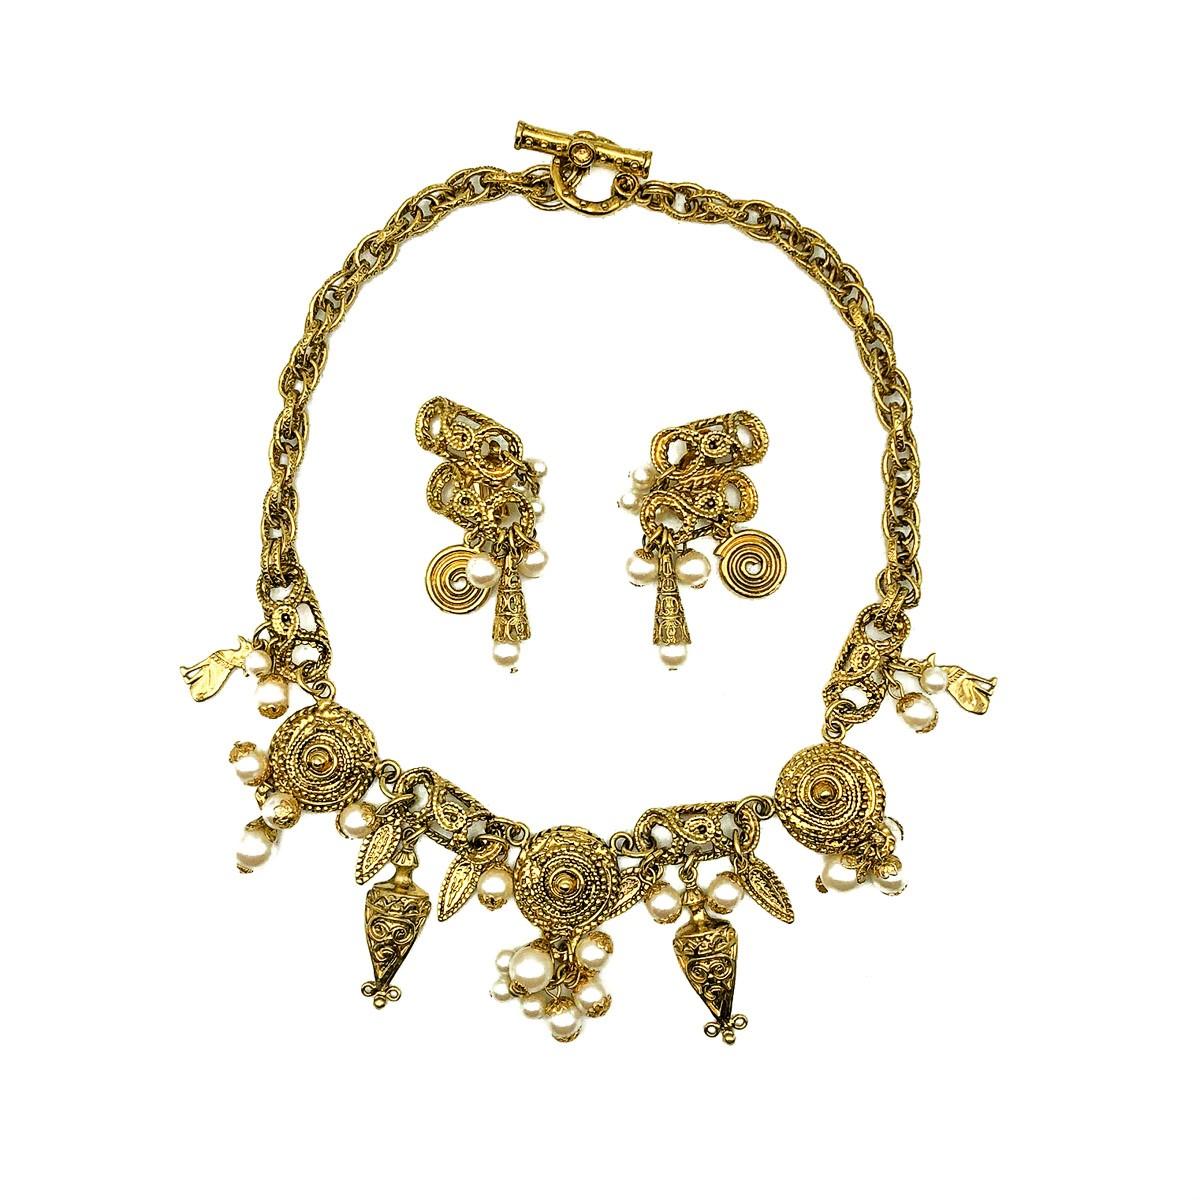 A wonderfully intricate and impactful Vintage Egyptian Charm Necklace with matching statement earrings. Featuring heavily embellished design elements inspired by Egyptian design and motifs. The lustrous gold setting off the creamy pearls to